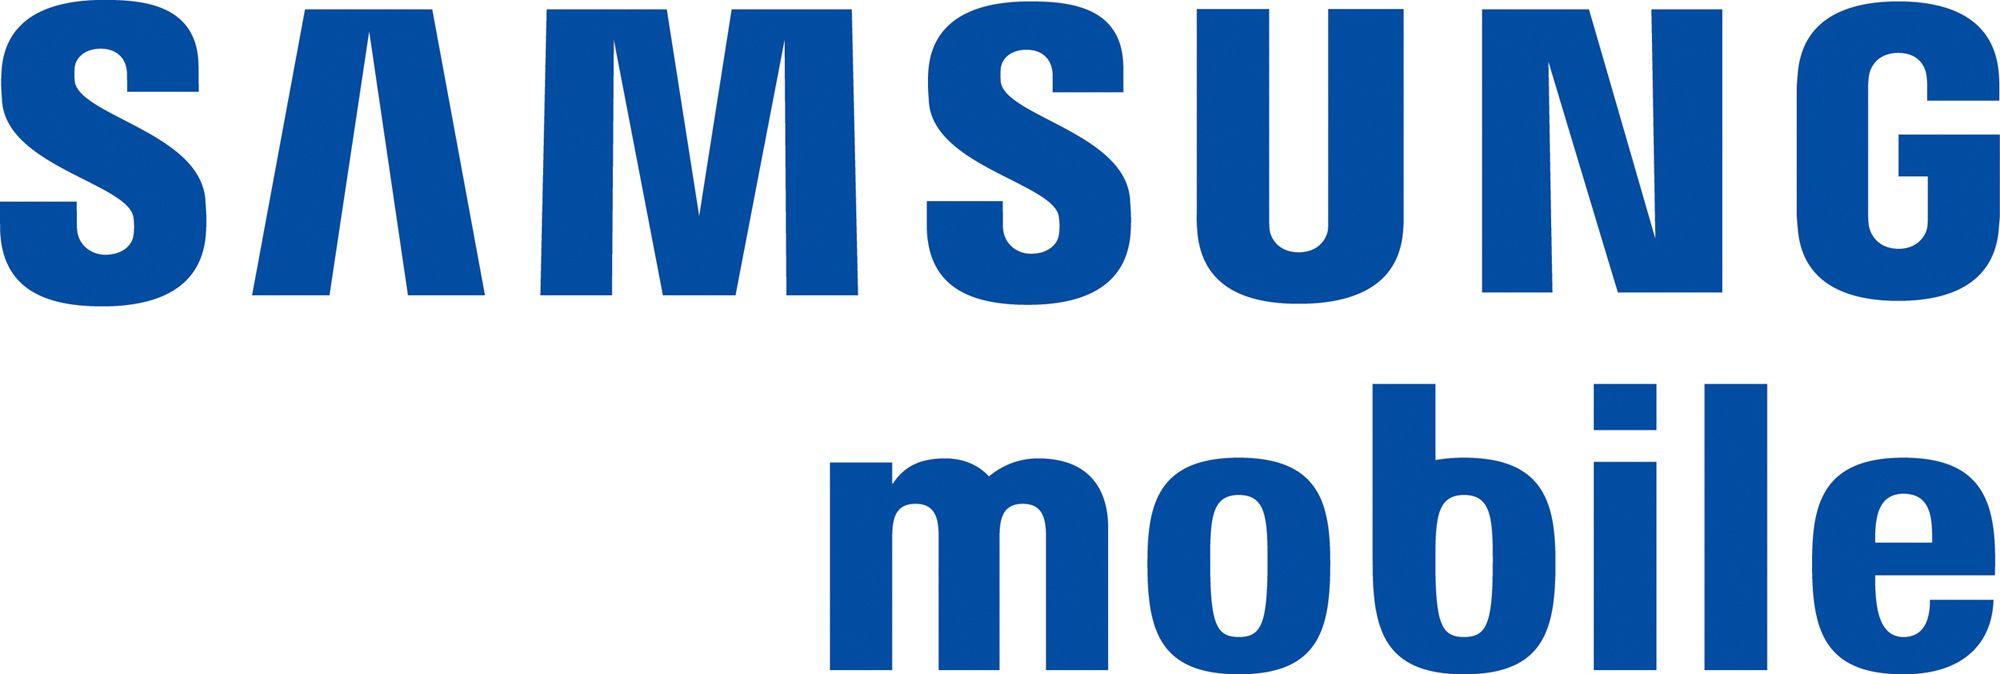 Samsung Smartphone Logo - Boost Mobile Pairs the Speed of 4G LTE and Shrinking Payments with ...